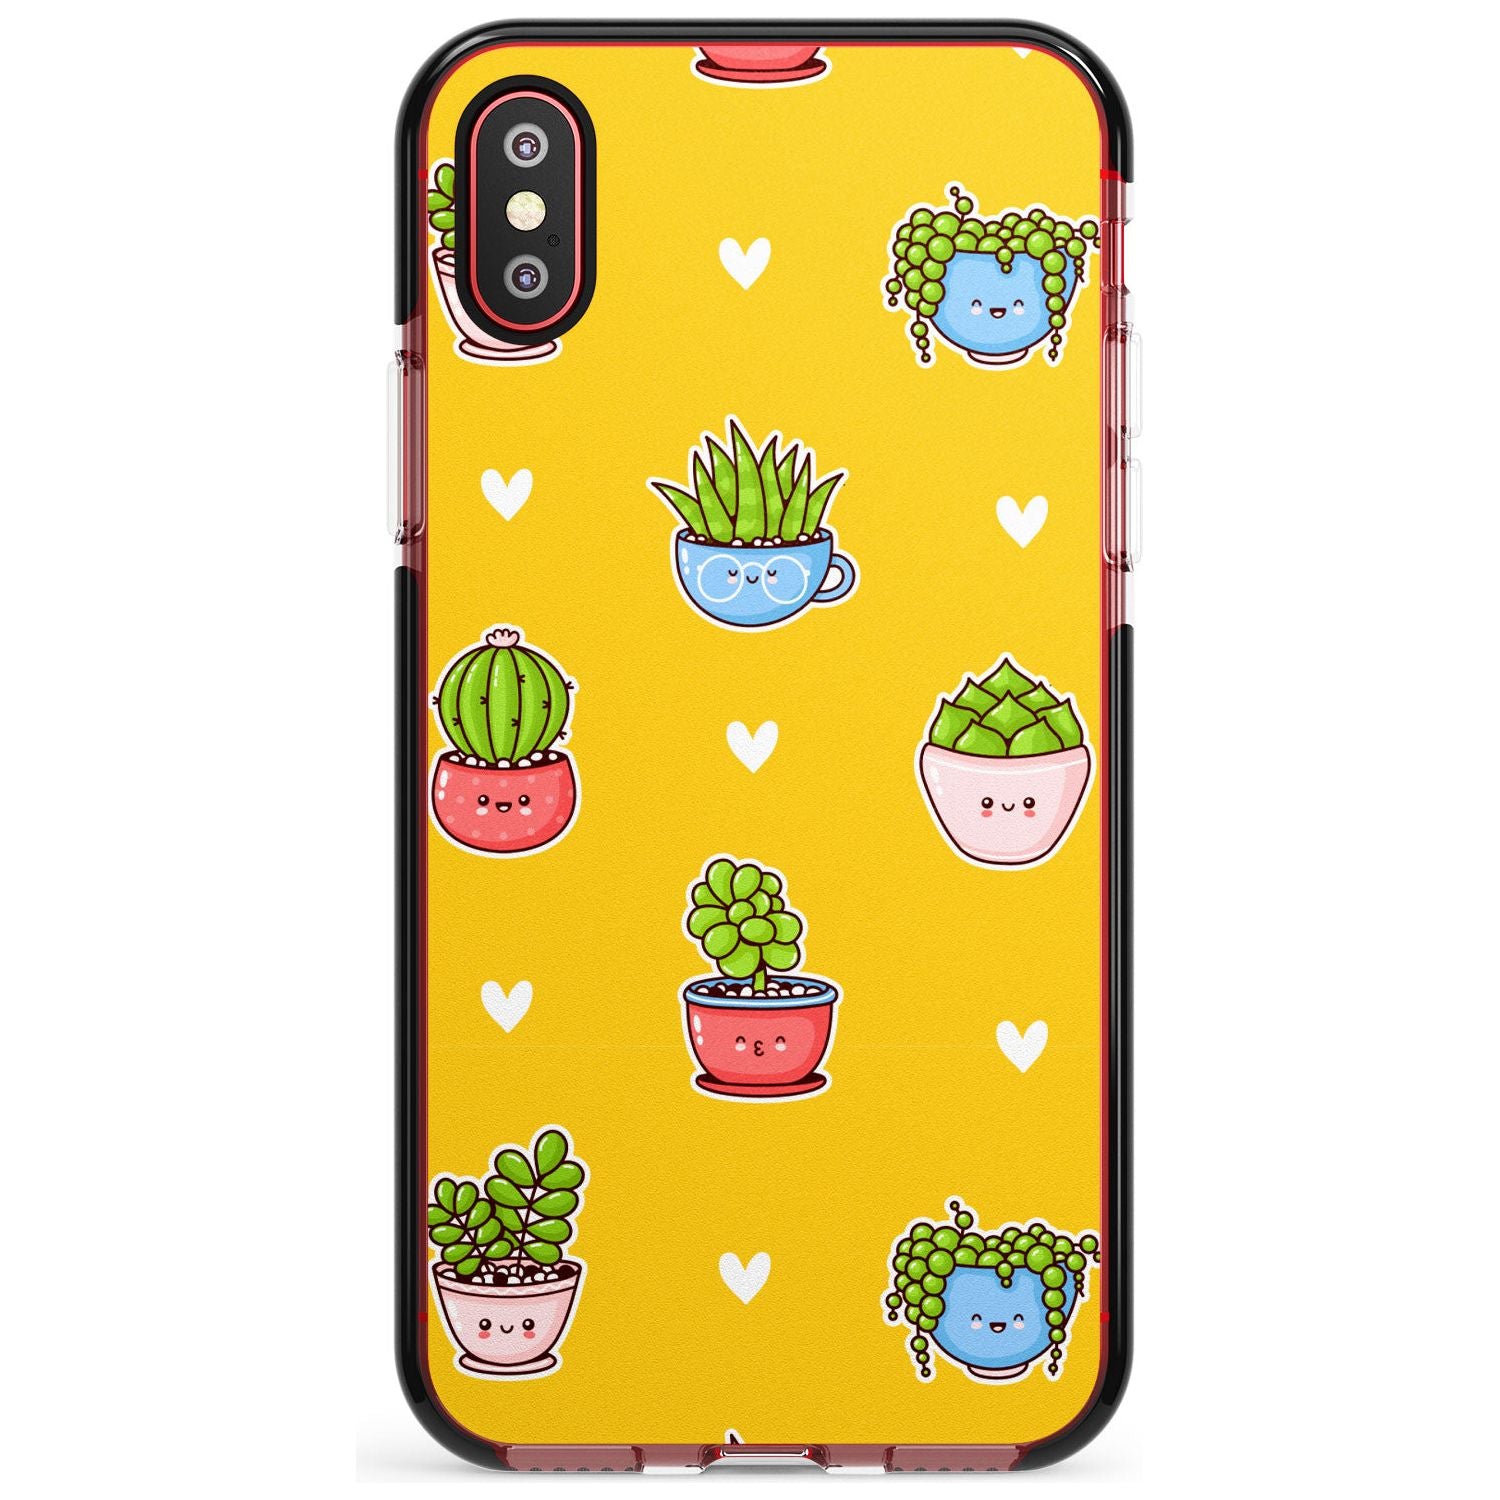 Plant Faces Kawaii Pattern Black Impact Phone Case for iPhone X XS Max XR